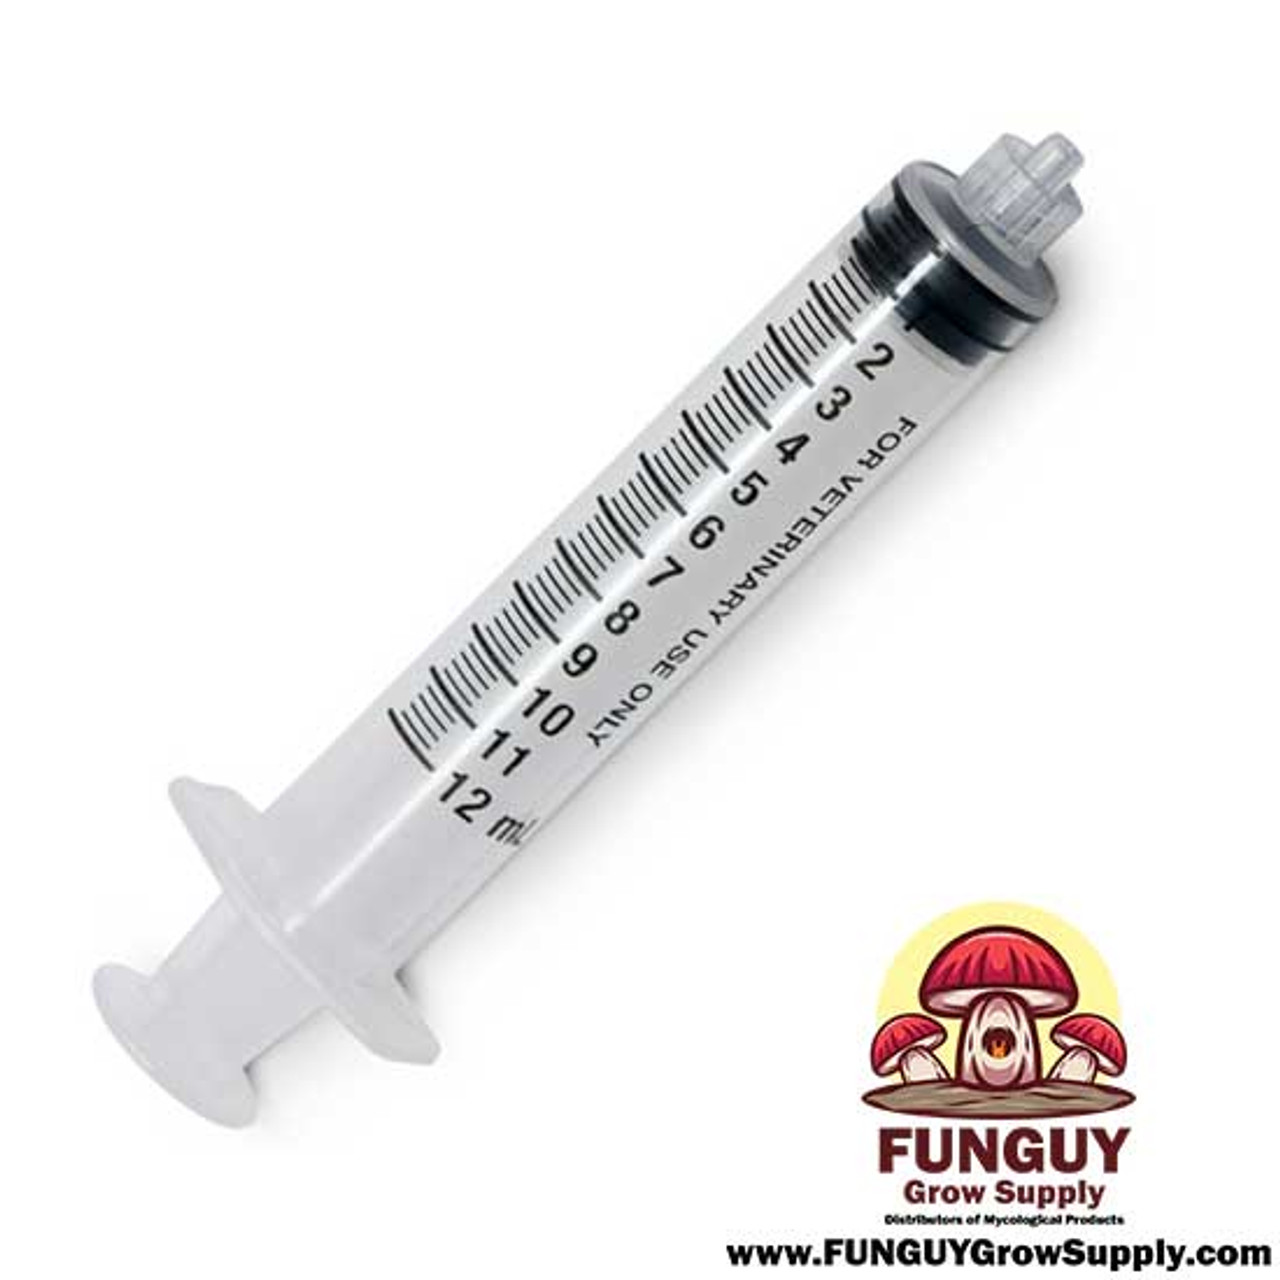 FunGuy Grow Supply | Spore Syringe for Mushroom Cultivation